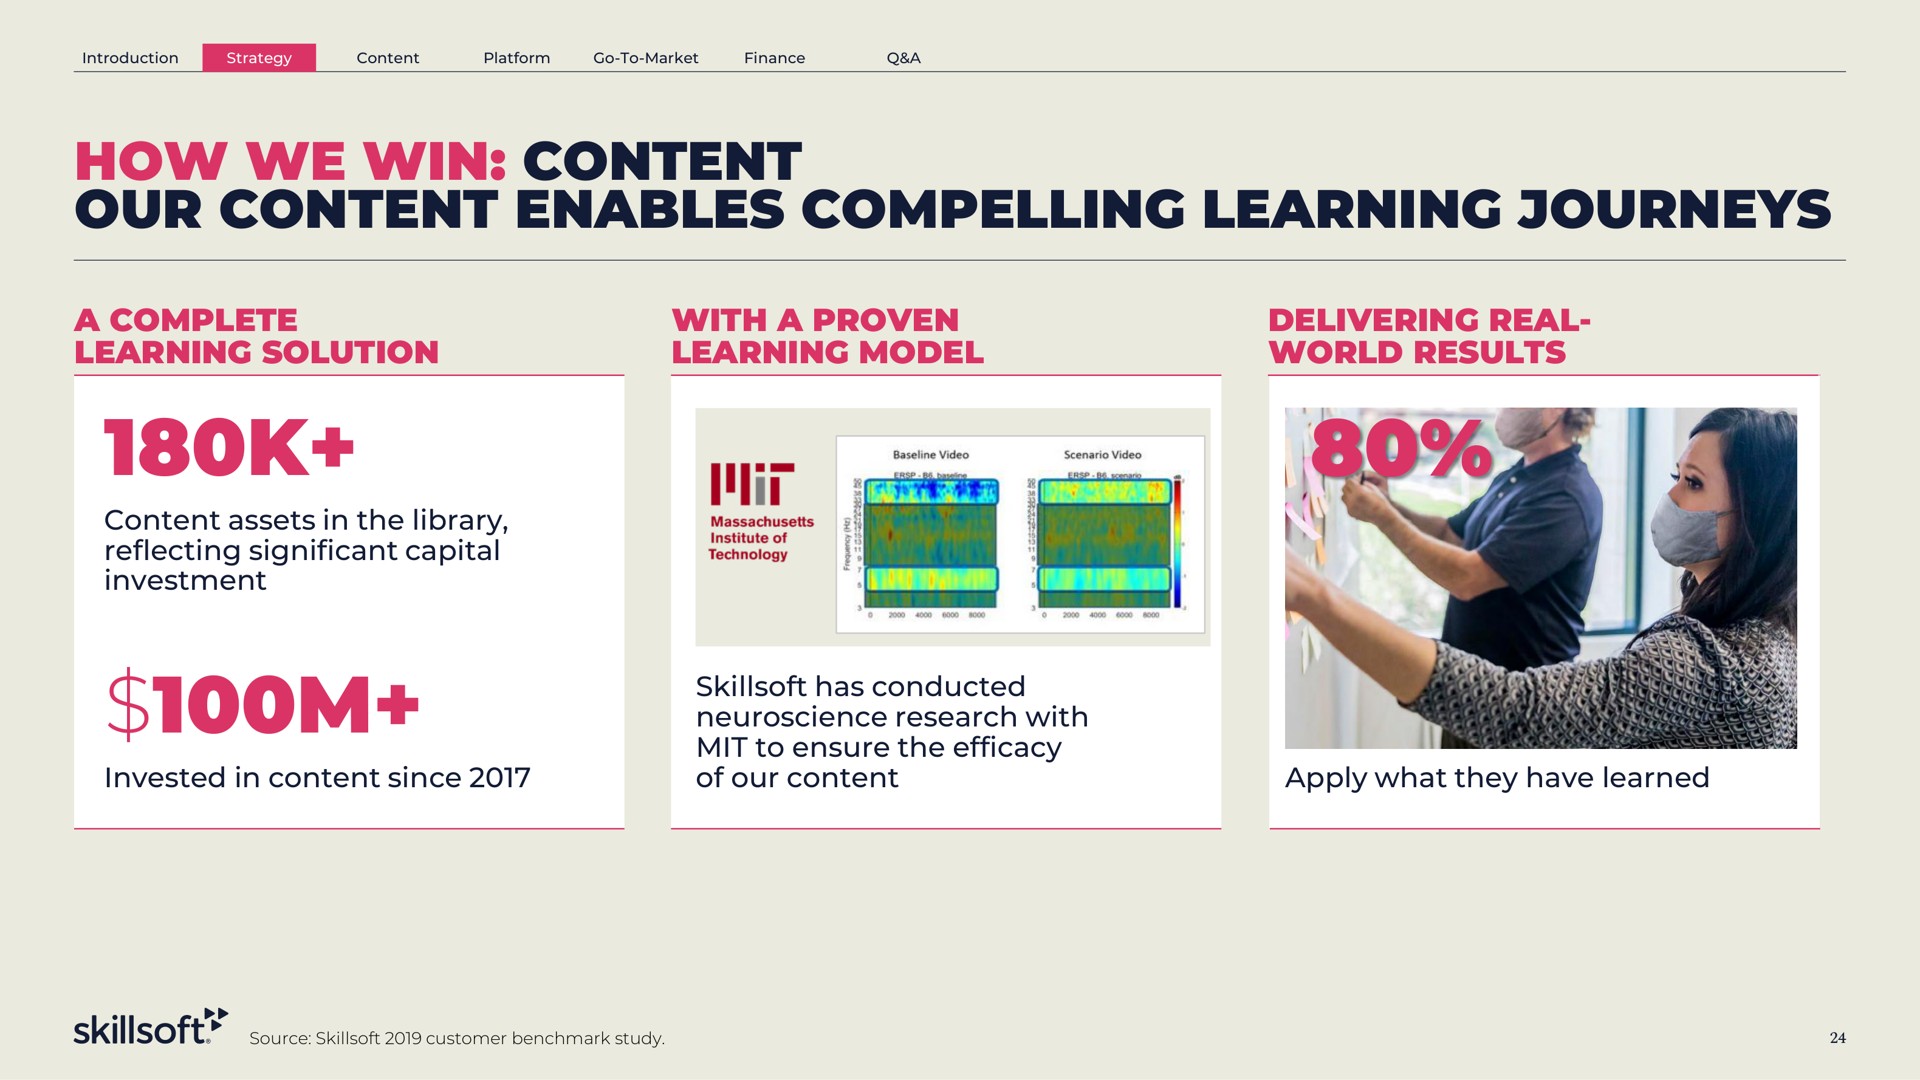 how we win content our content enables compelling learning journeys a complete learning solution with a proven learning model delivering real world results reflecting significant capital i technology | Skillsoft